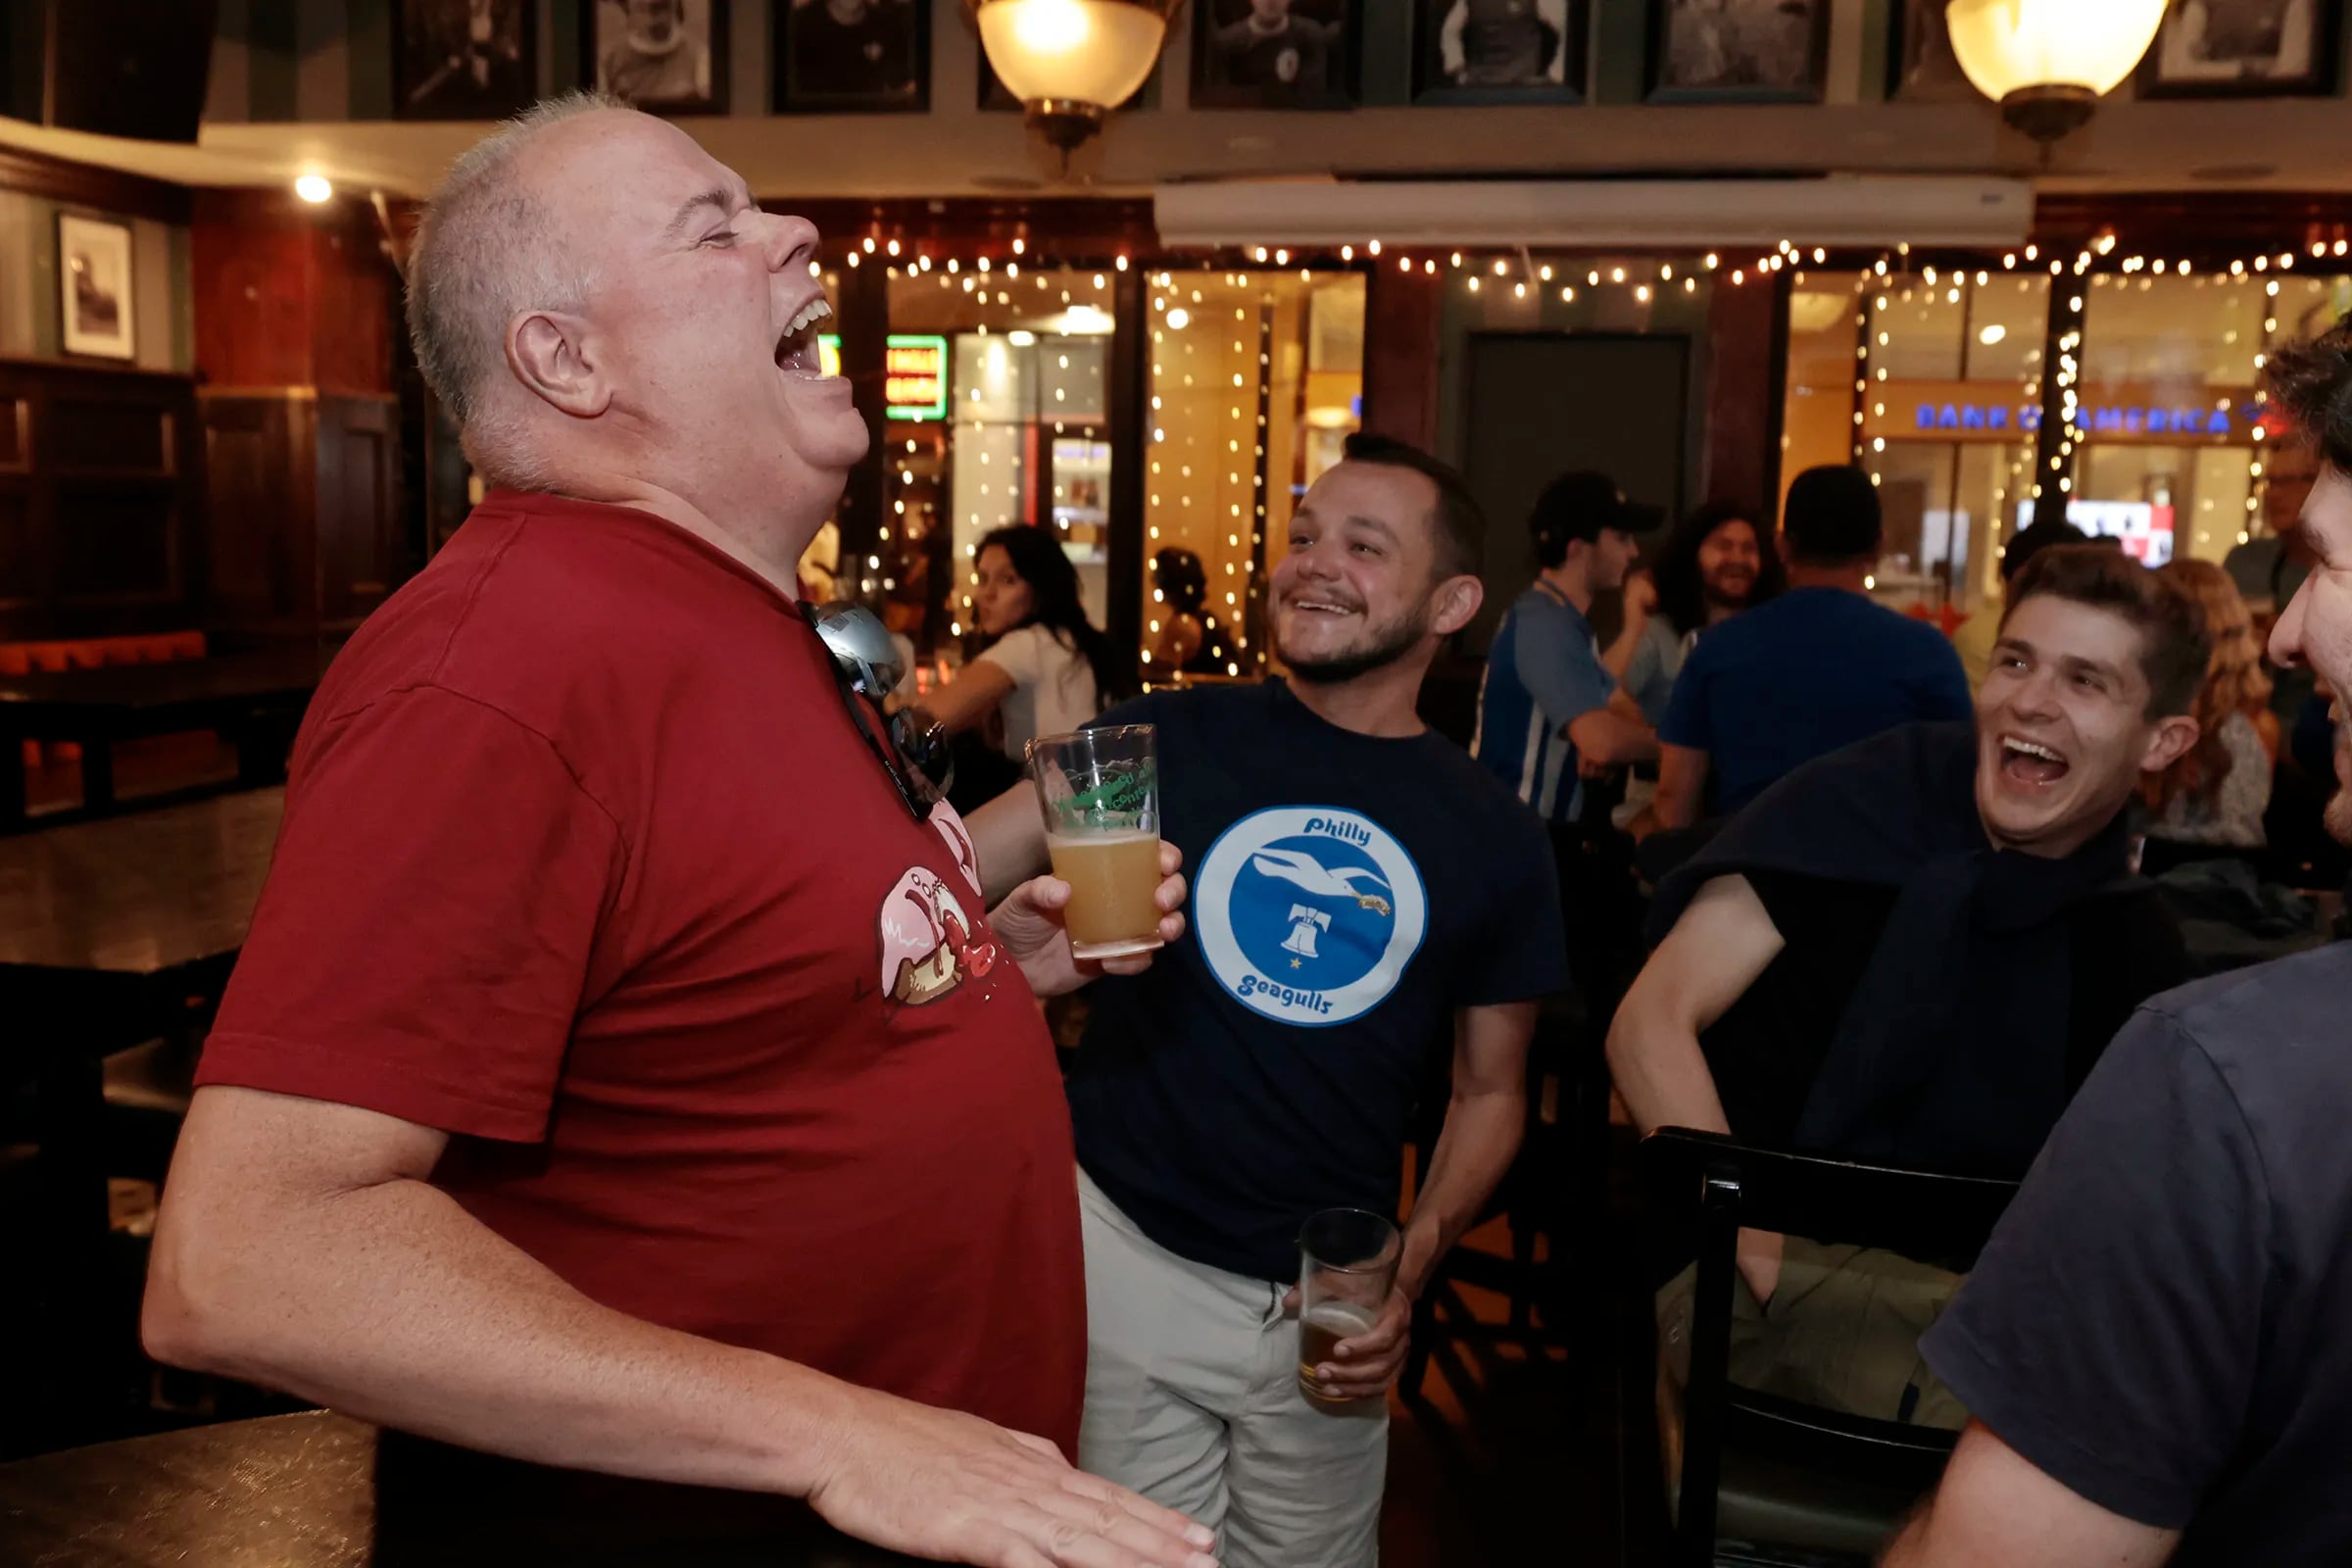 Steve Maehl (left) of Oconomowoc, Wisc., laughs as Philly Seagulls president John Fitzpatrick and Dan Peck of Brighton, England, (right) look on during the supporter meetup, to kickoff the summer series weekend, at Fadó Irish Pub in Phila., Pa. on Thursday, July 20, 2023.